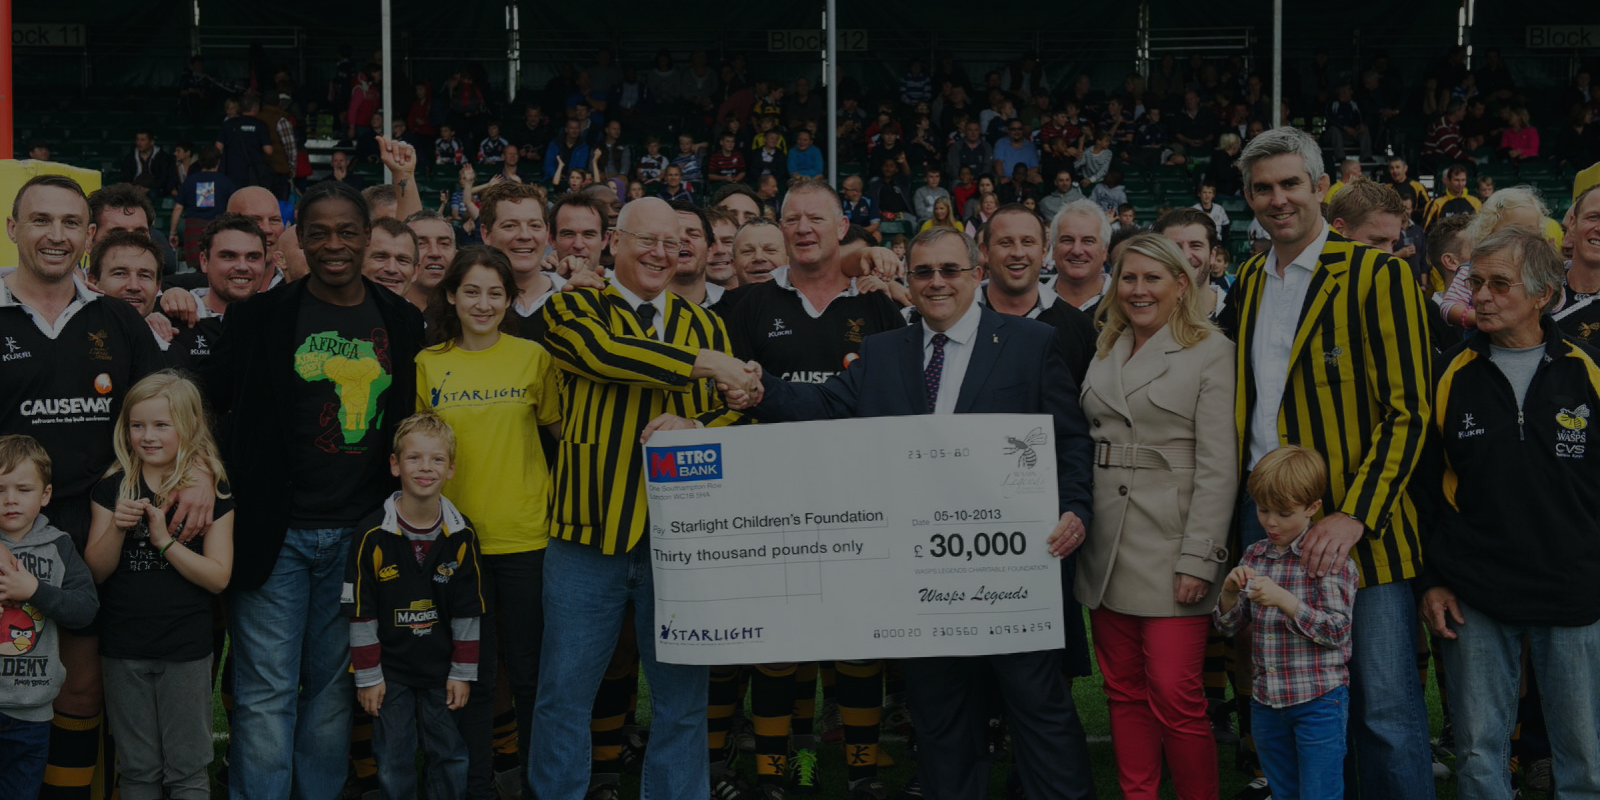 Wasps Legends pictured on the 2016 Caldy tour in their Wasps Legends blazers